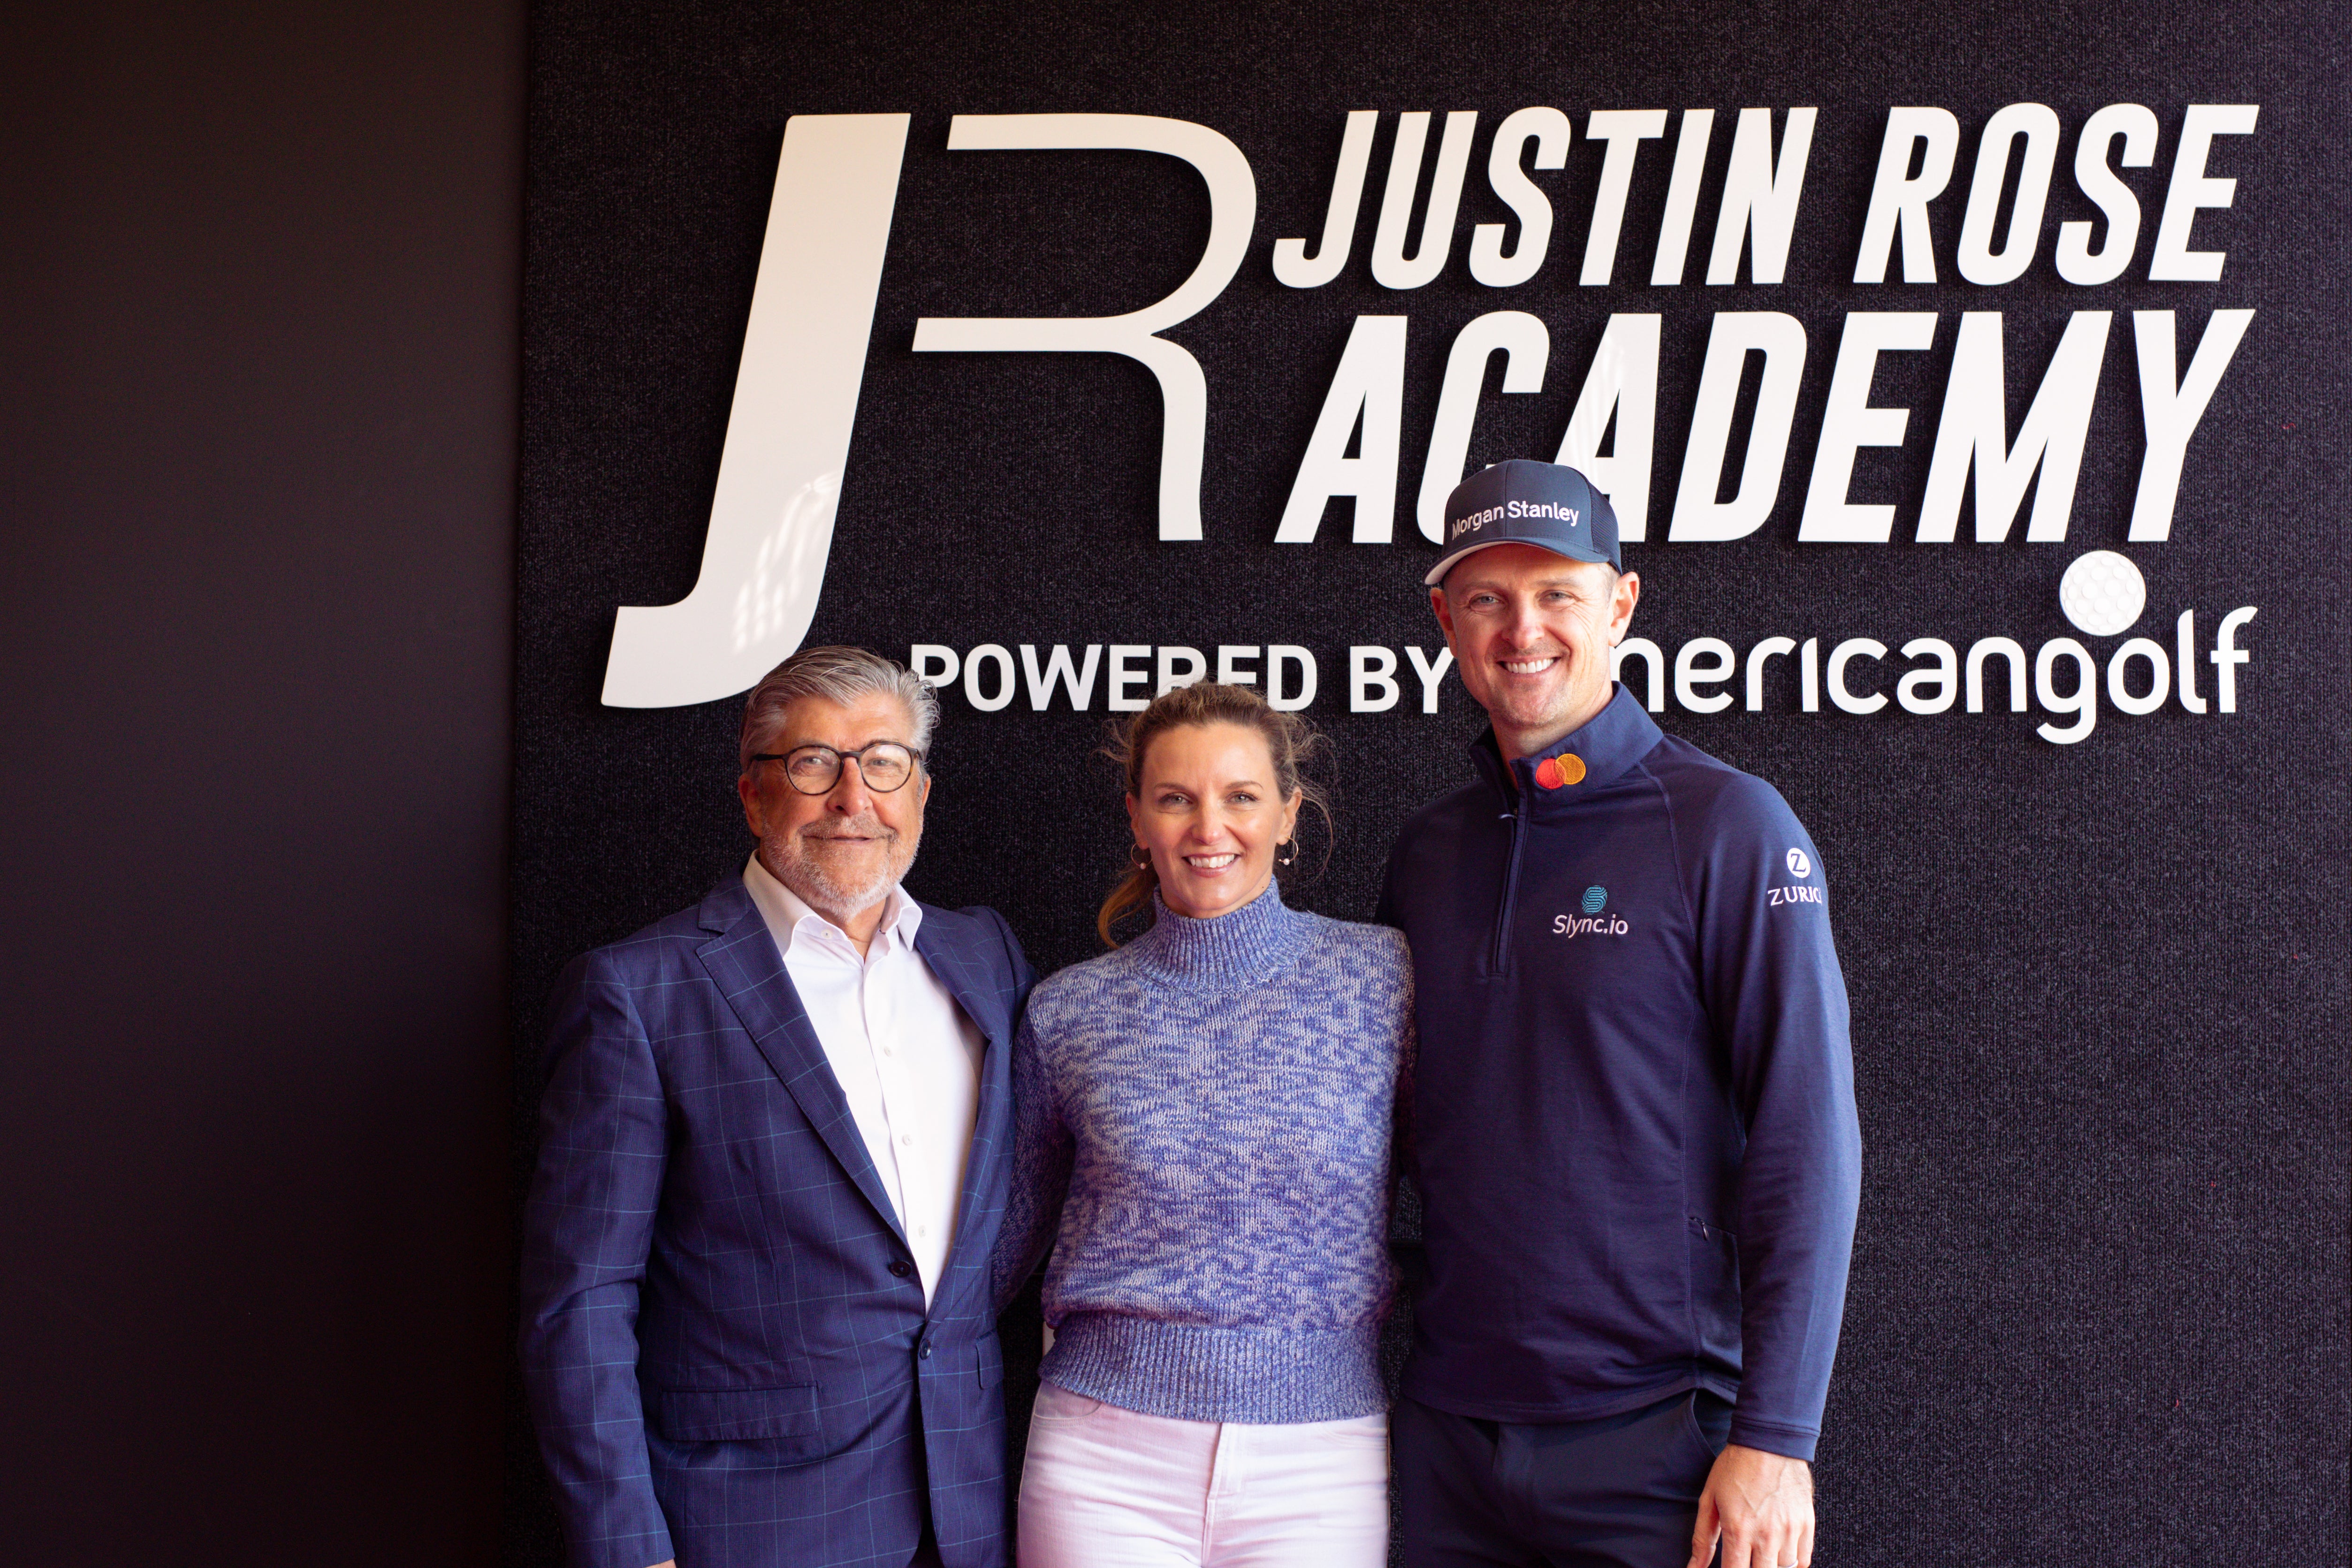 American Golf CEO Gary Favell with Kate and Justin Rose at the launch of the Justin Rose Academy (Handout image)